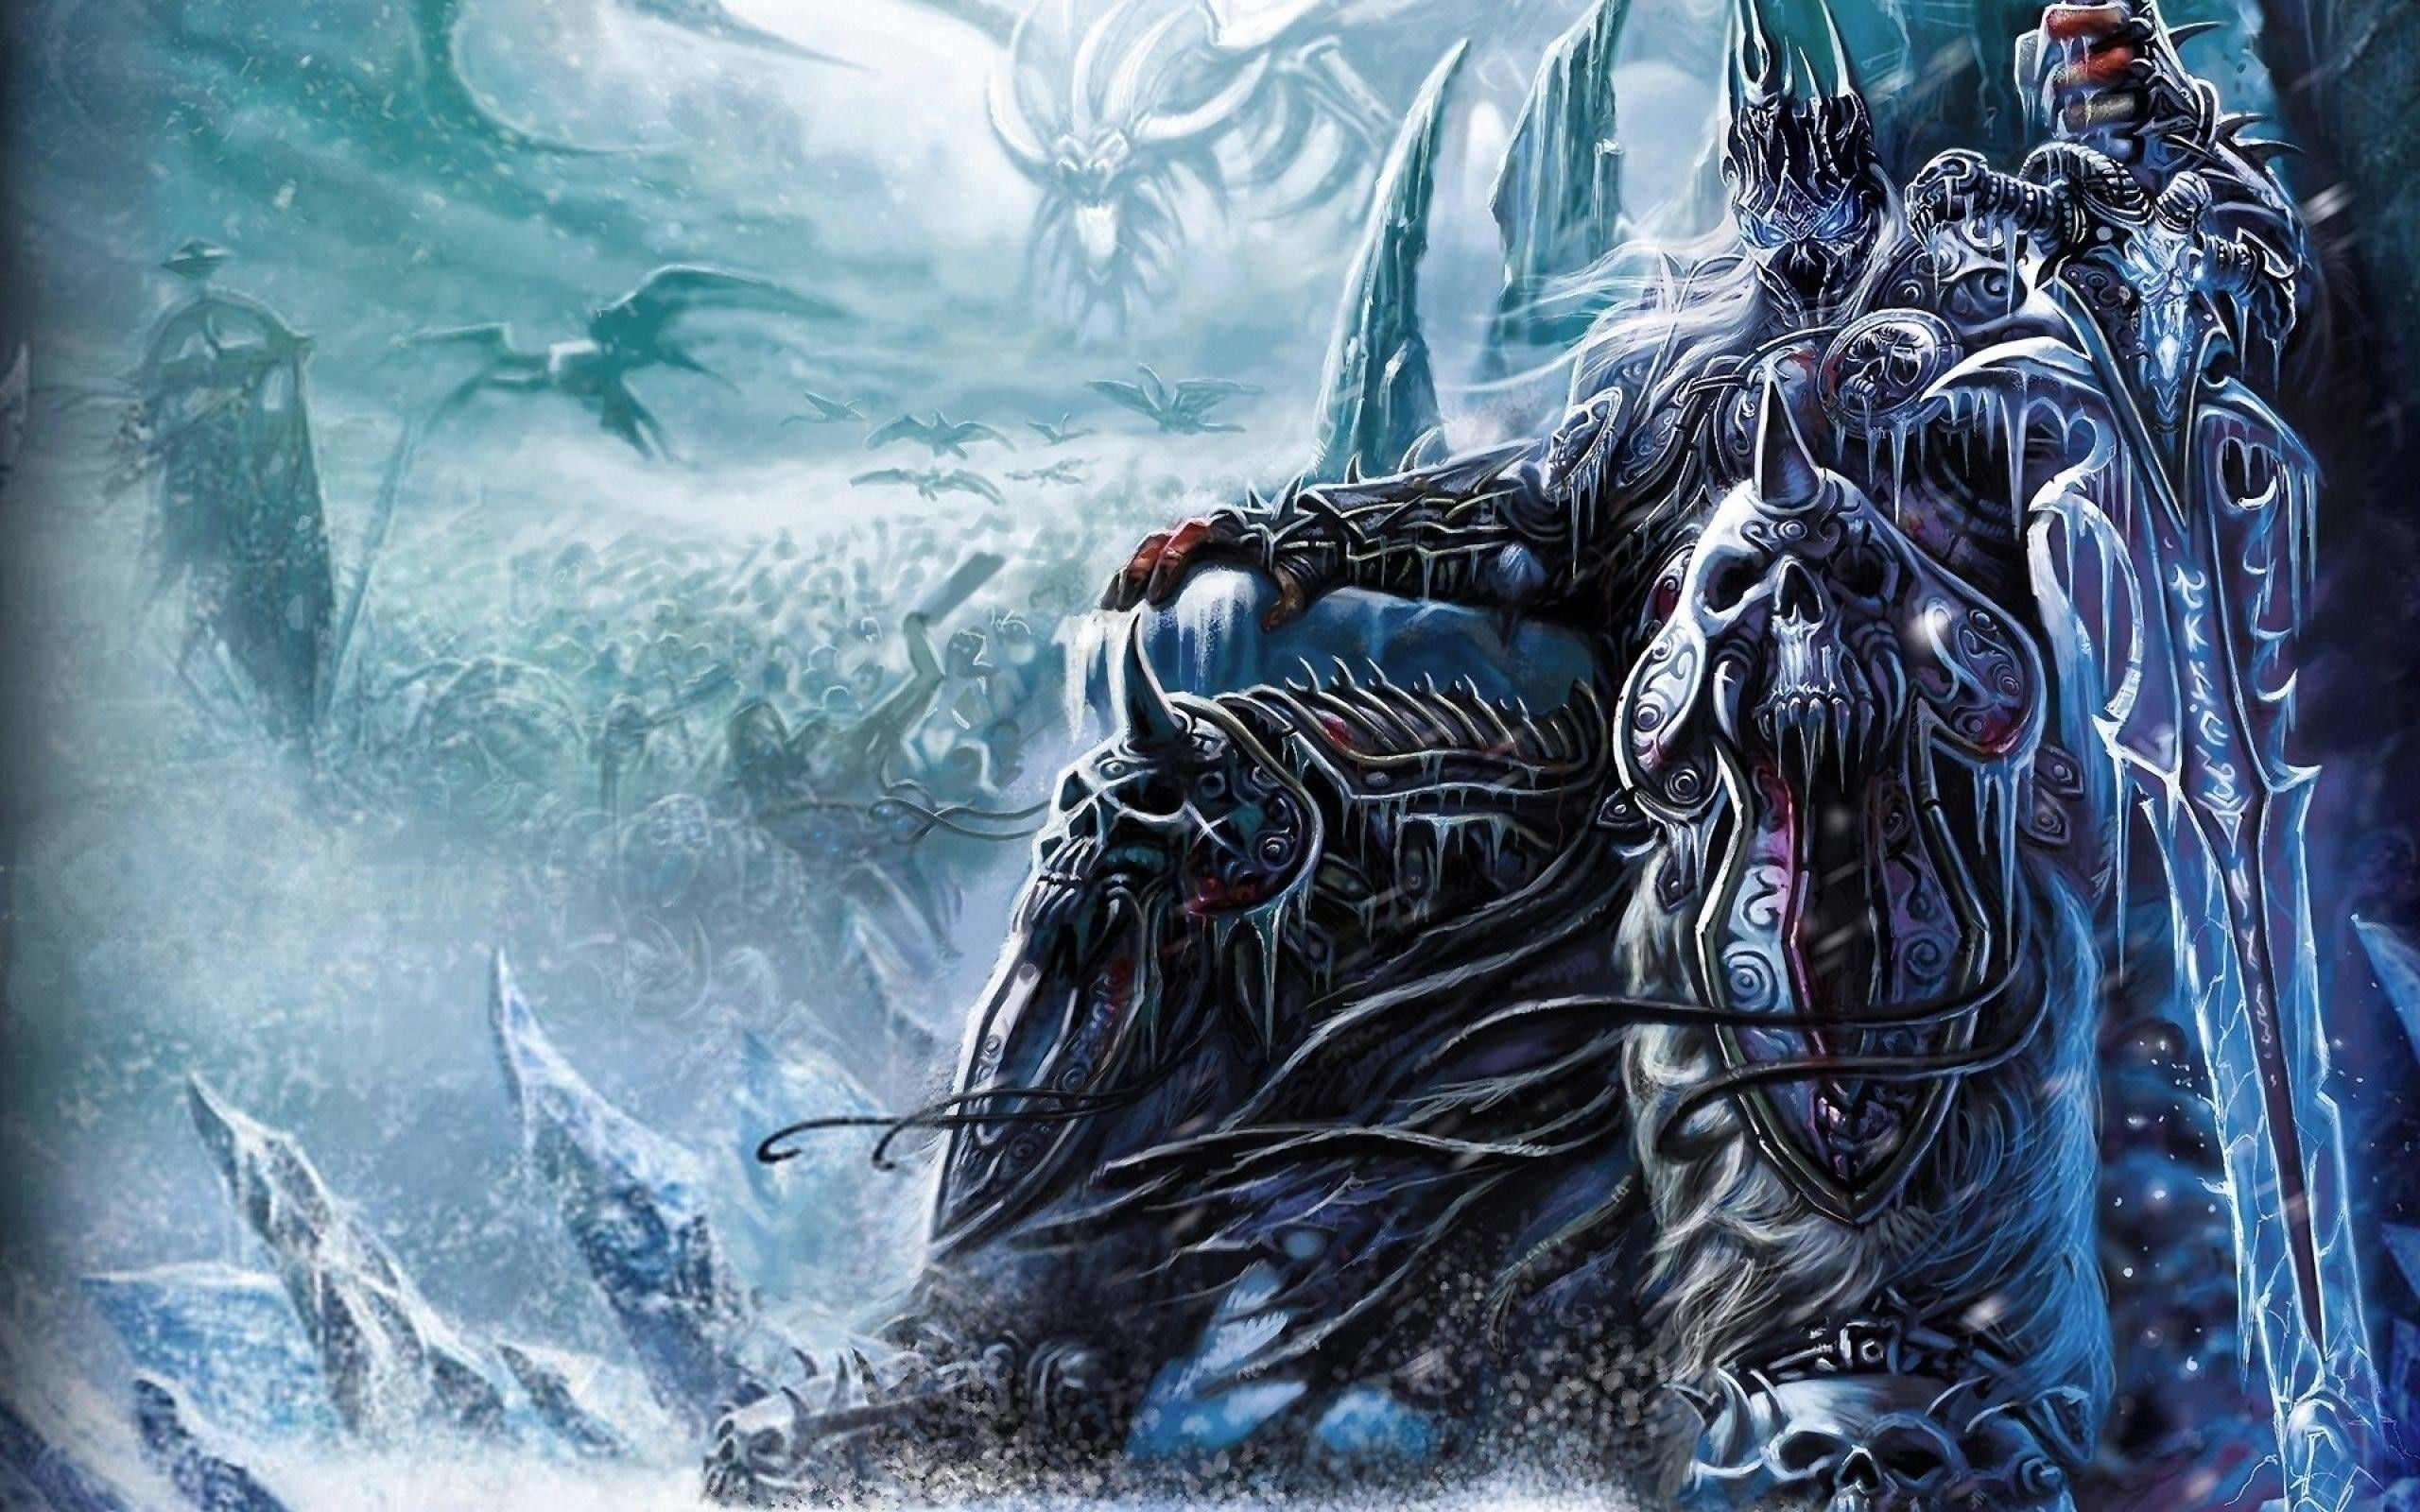 2560x1600 World Of Warcraft Wrath Of The Lich King Artistic, Games Wallpapers | World of warcraft wallpaper, World of warcraft, Lich king